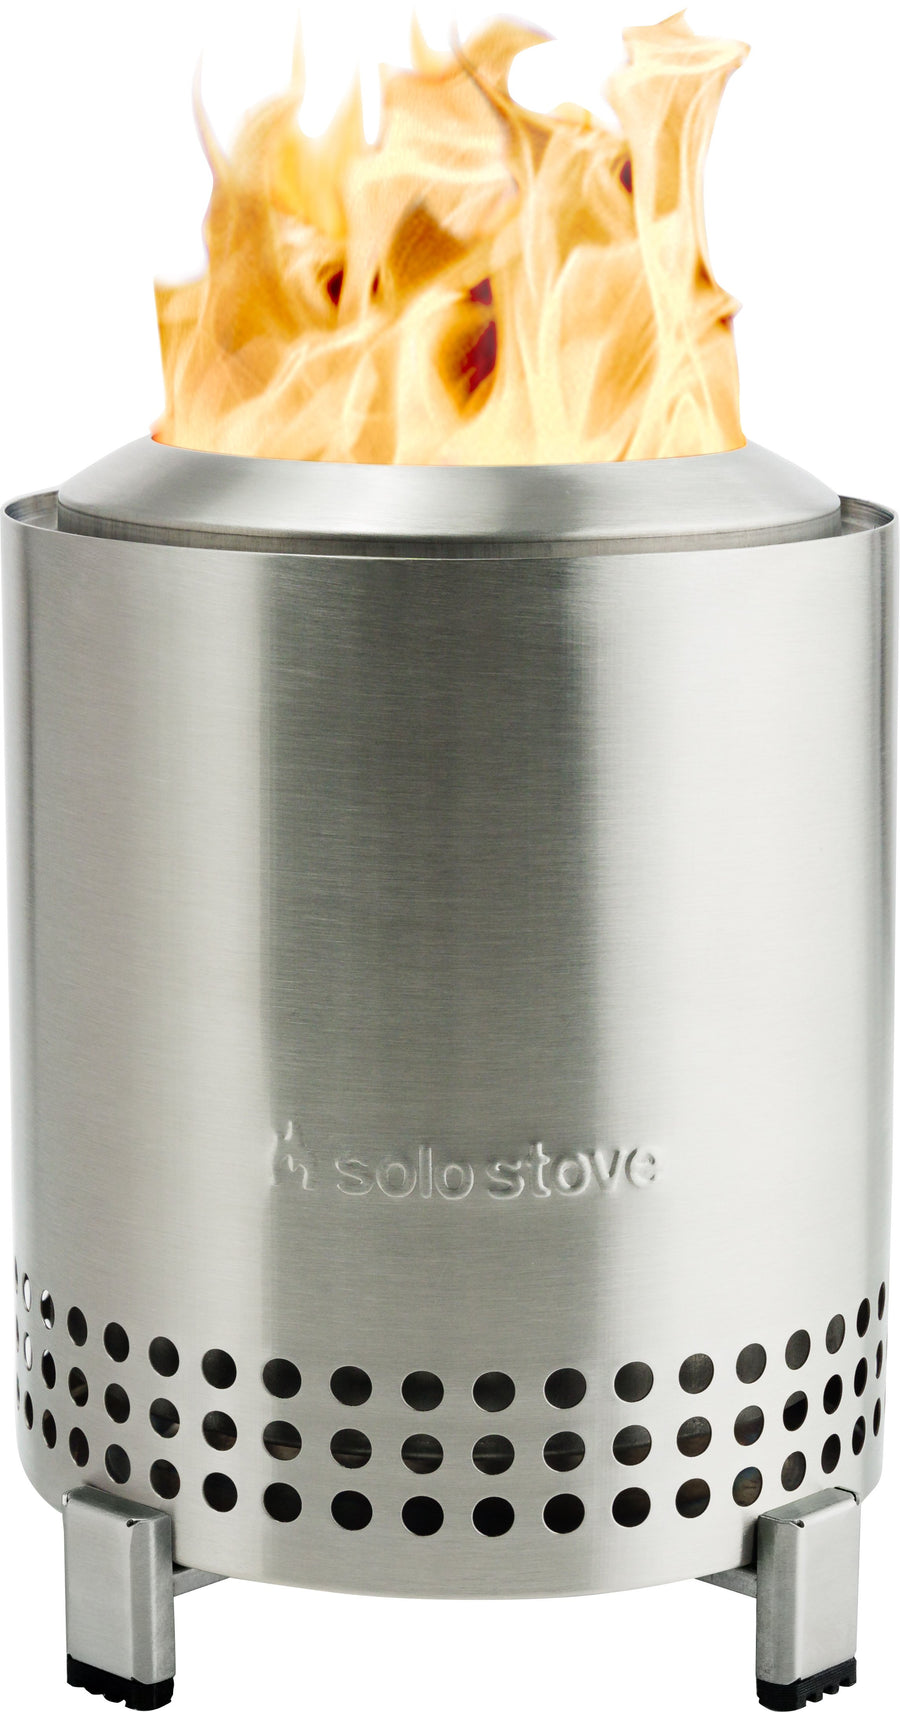 Solo Stove - Mesa - Stainless Steel - Stainless Steel_0